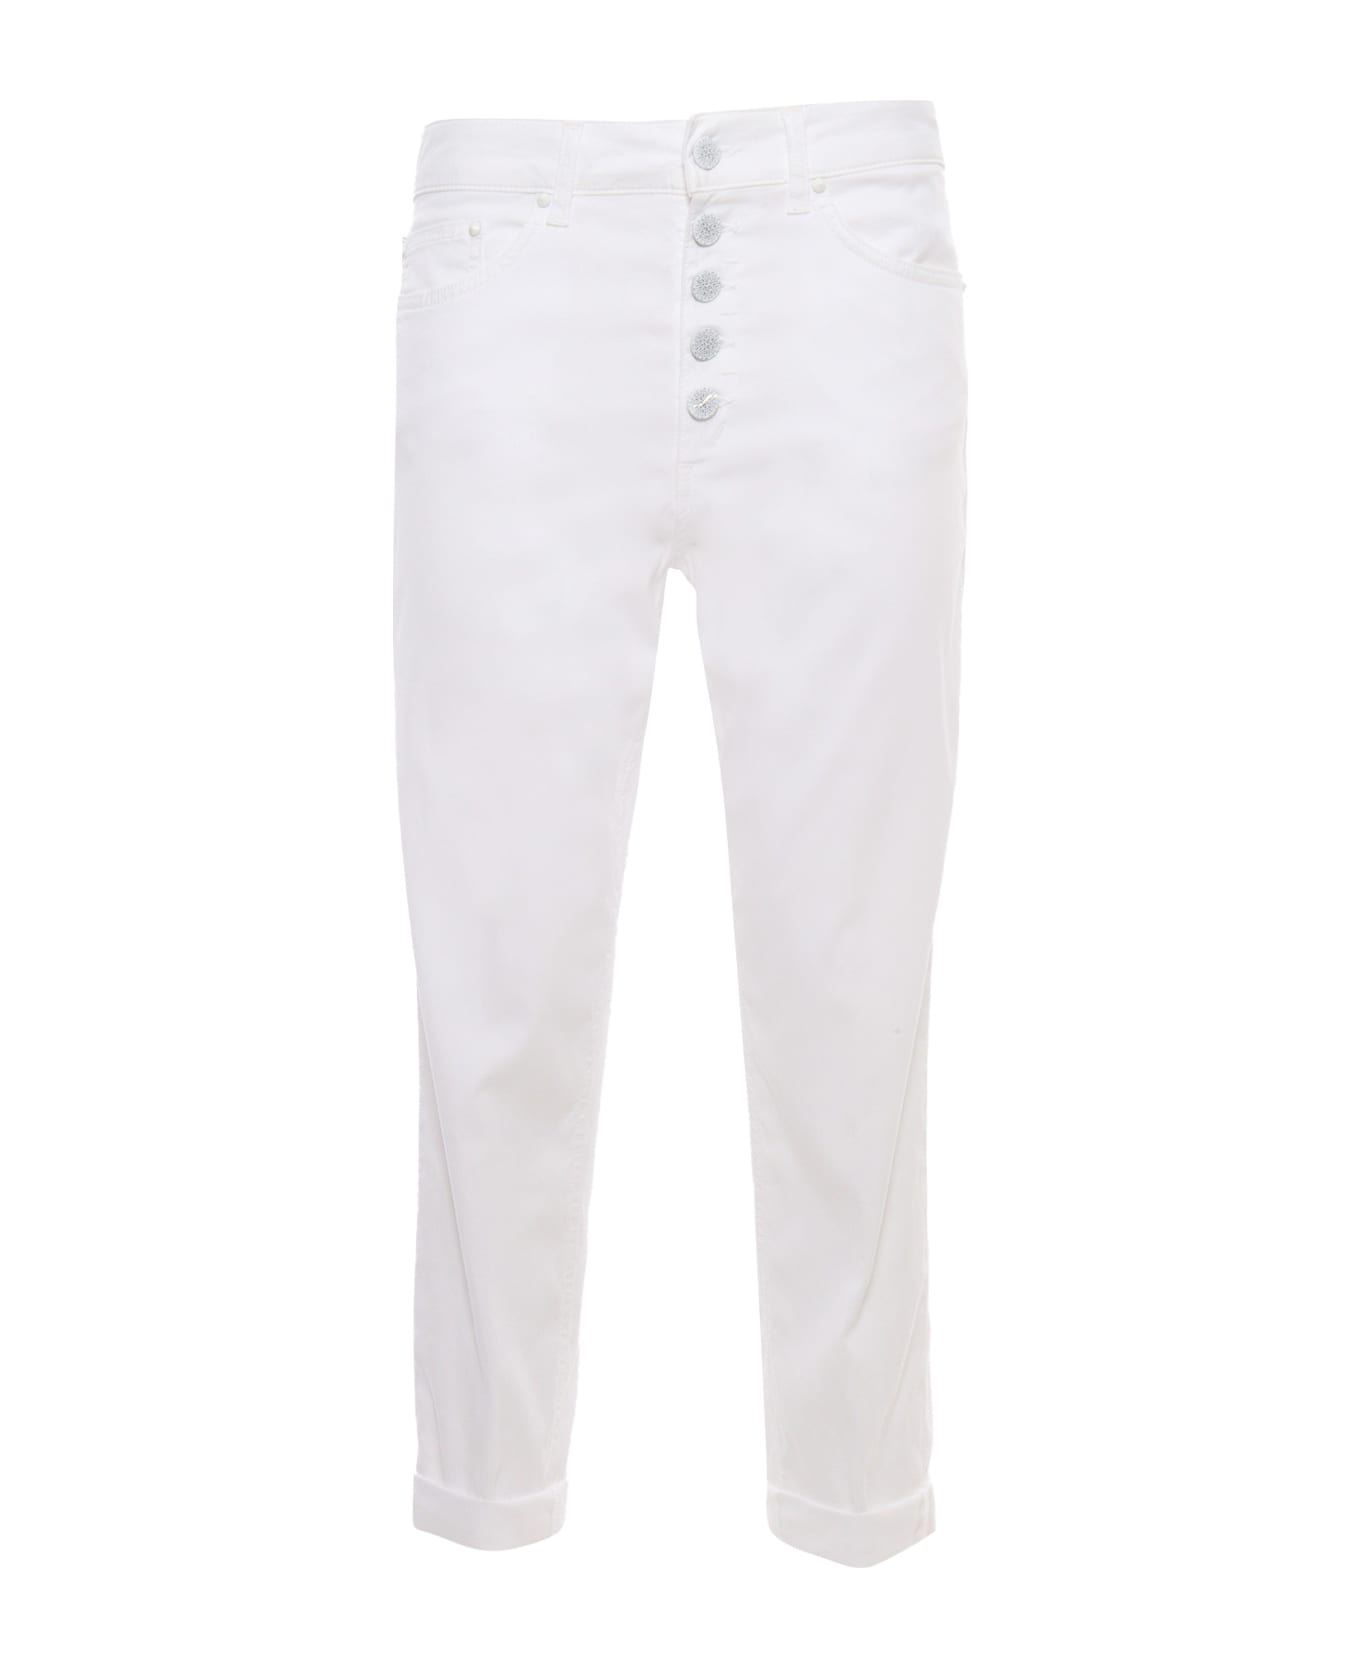 Dondup White High Waisted Jeans - White